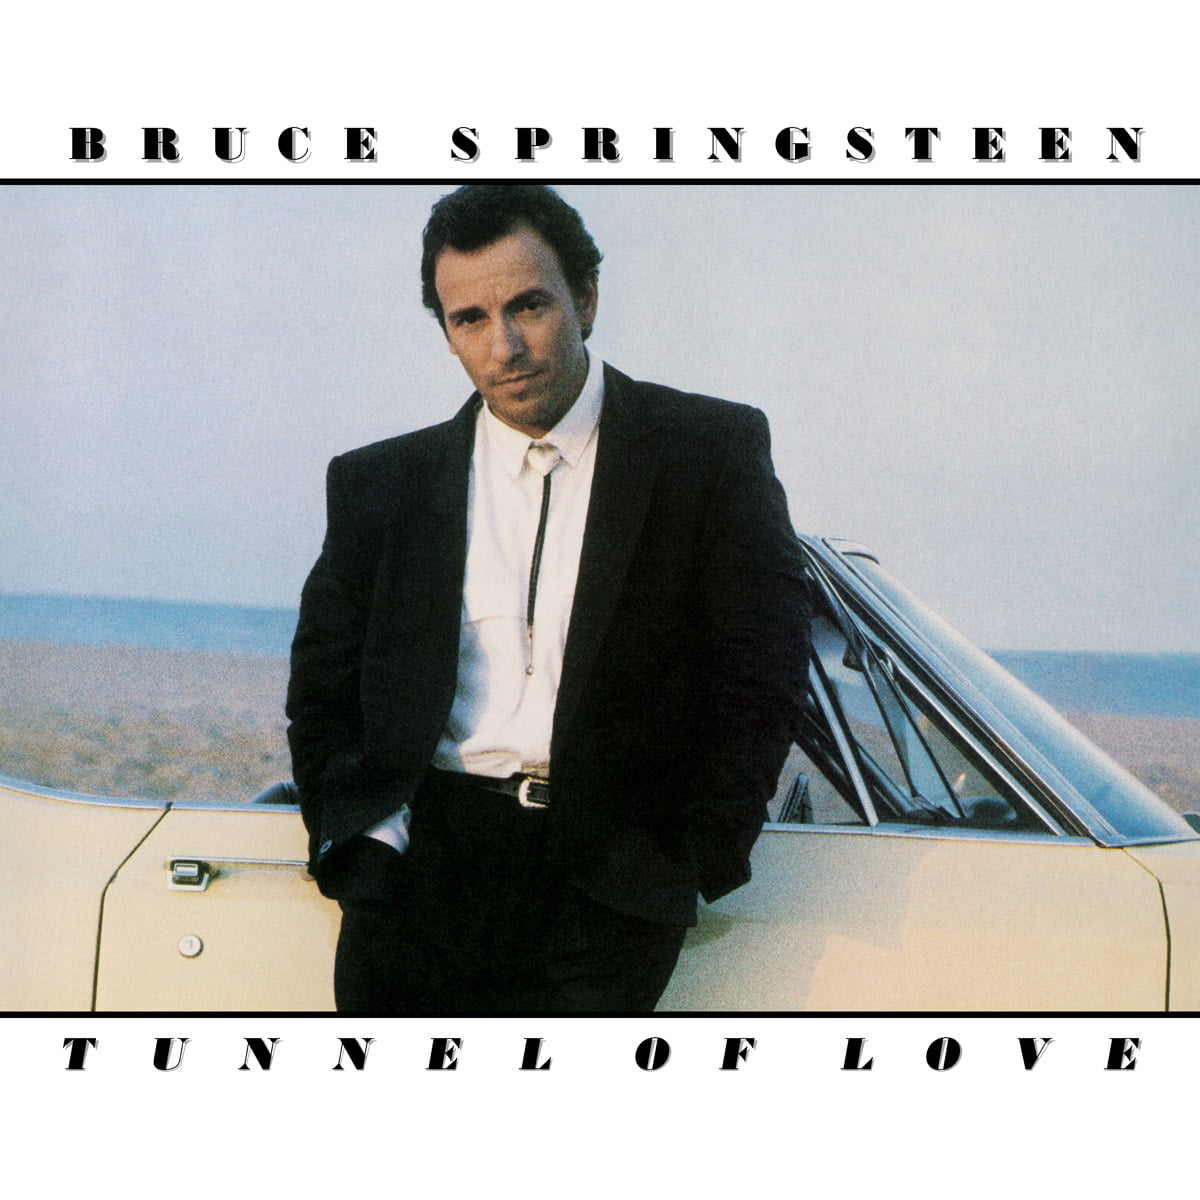 Bruce Springsteen Tunnel of Love front cover